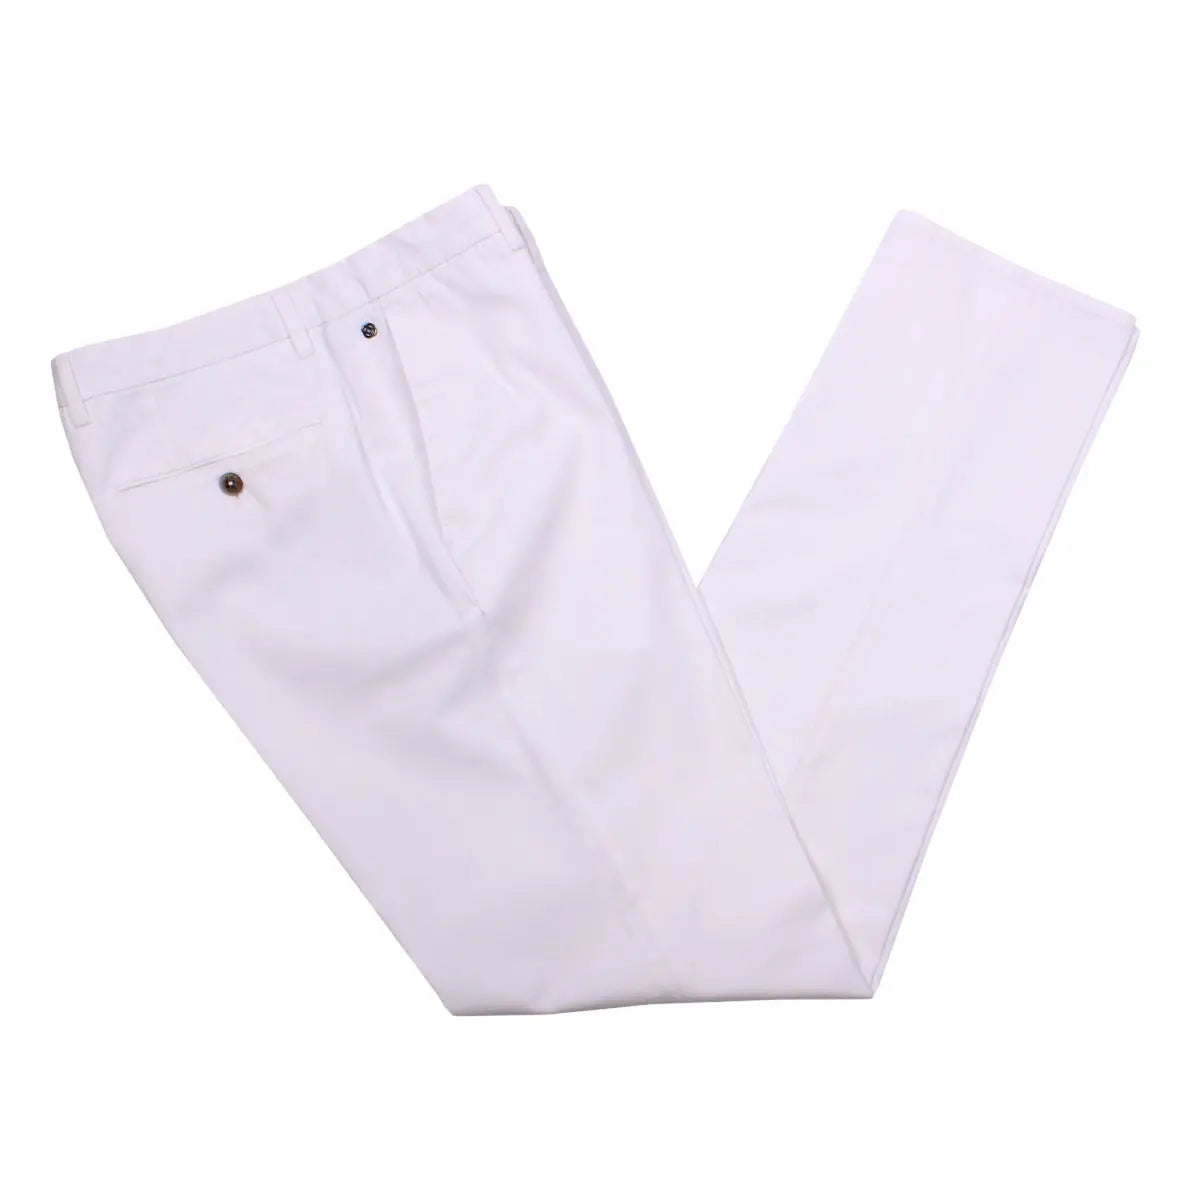 Off-White Cotton Stretch Slim Fit Chinos  Robert Old   